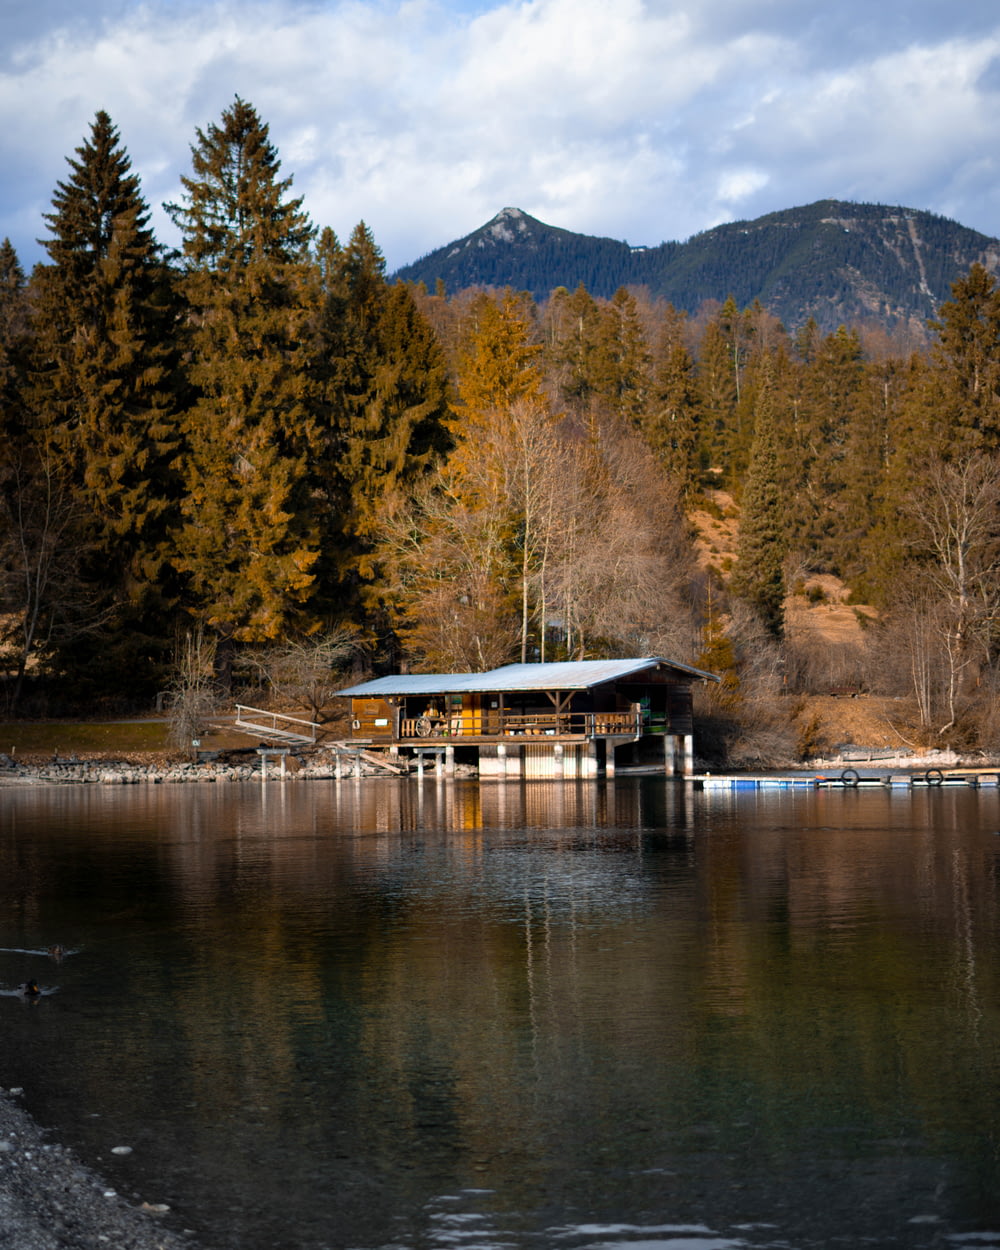 a boat house on a lake with mountains in the background